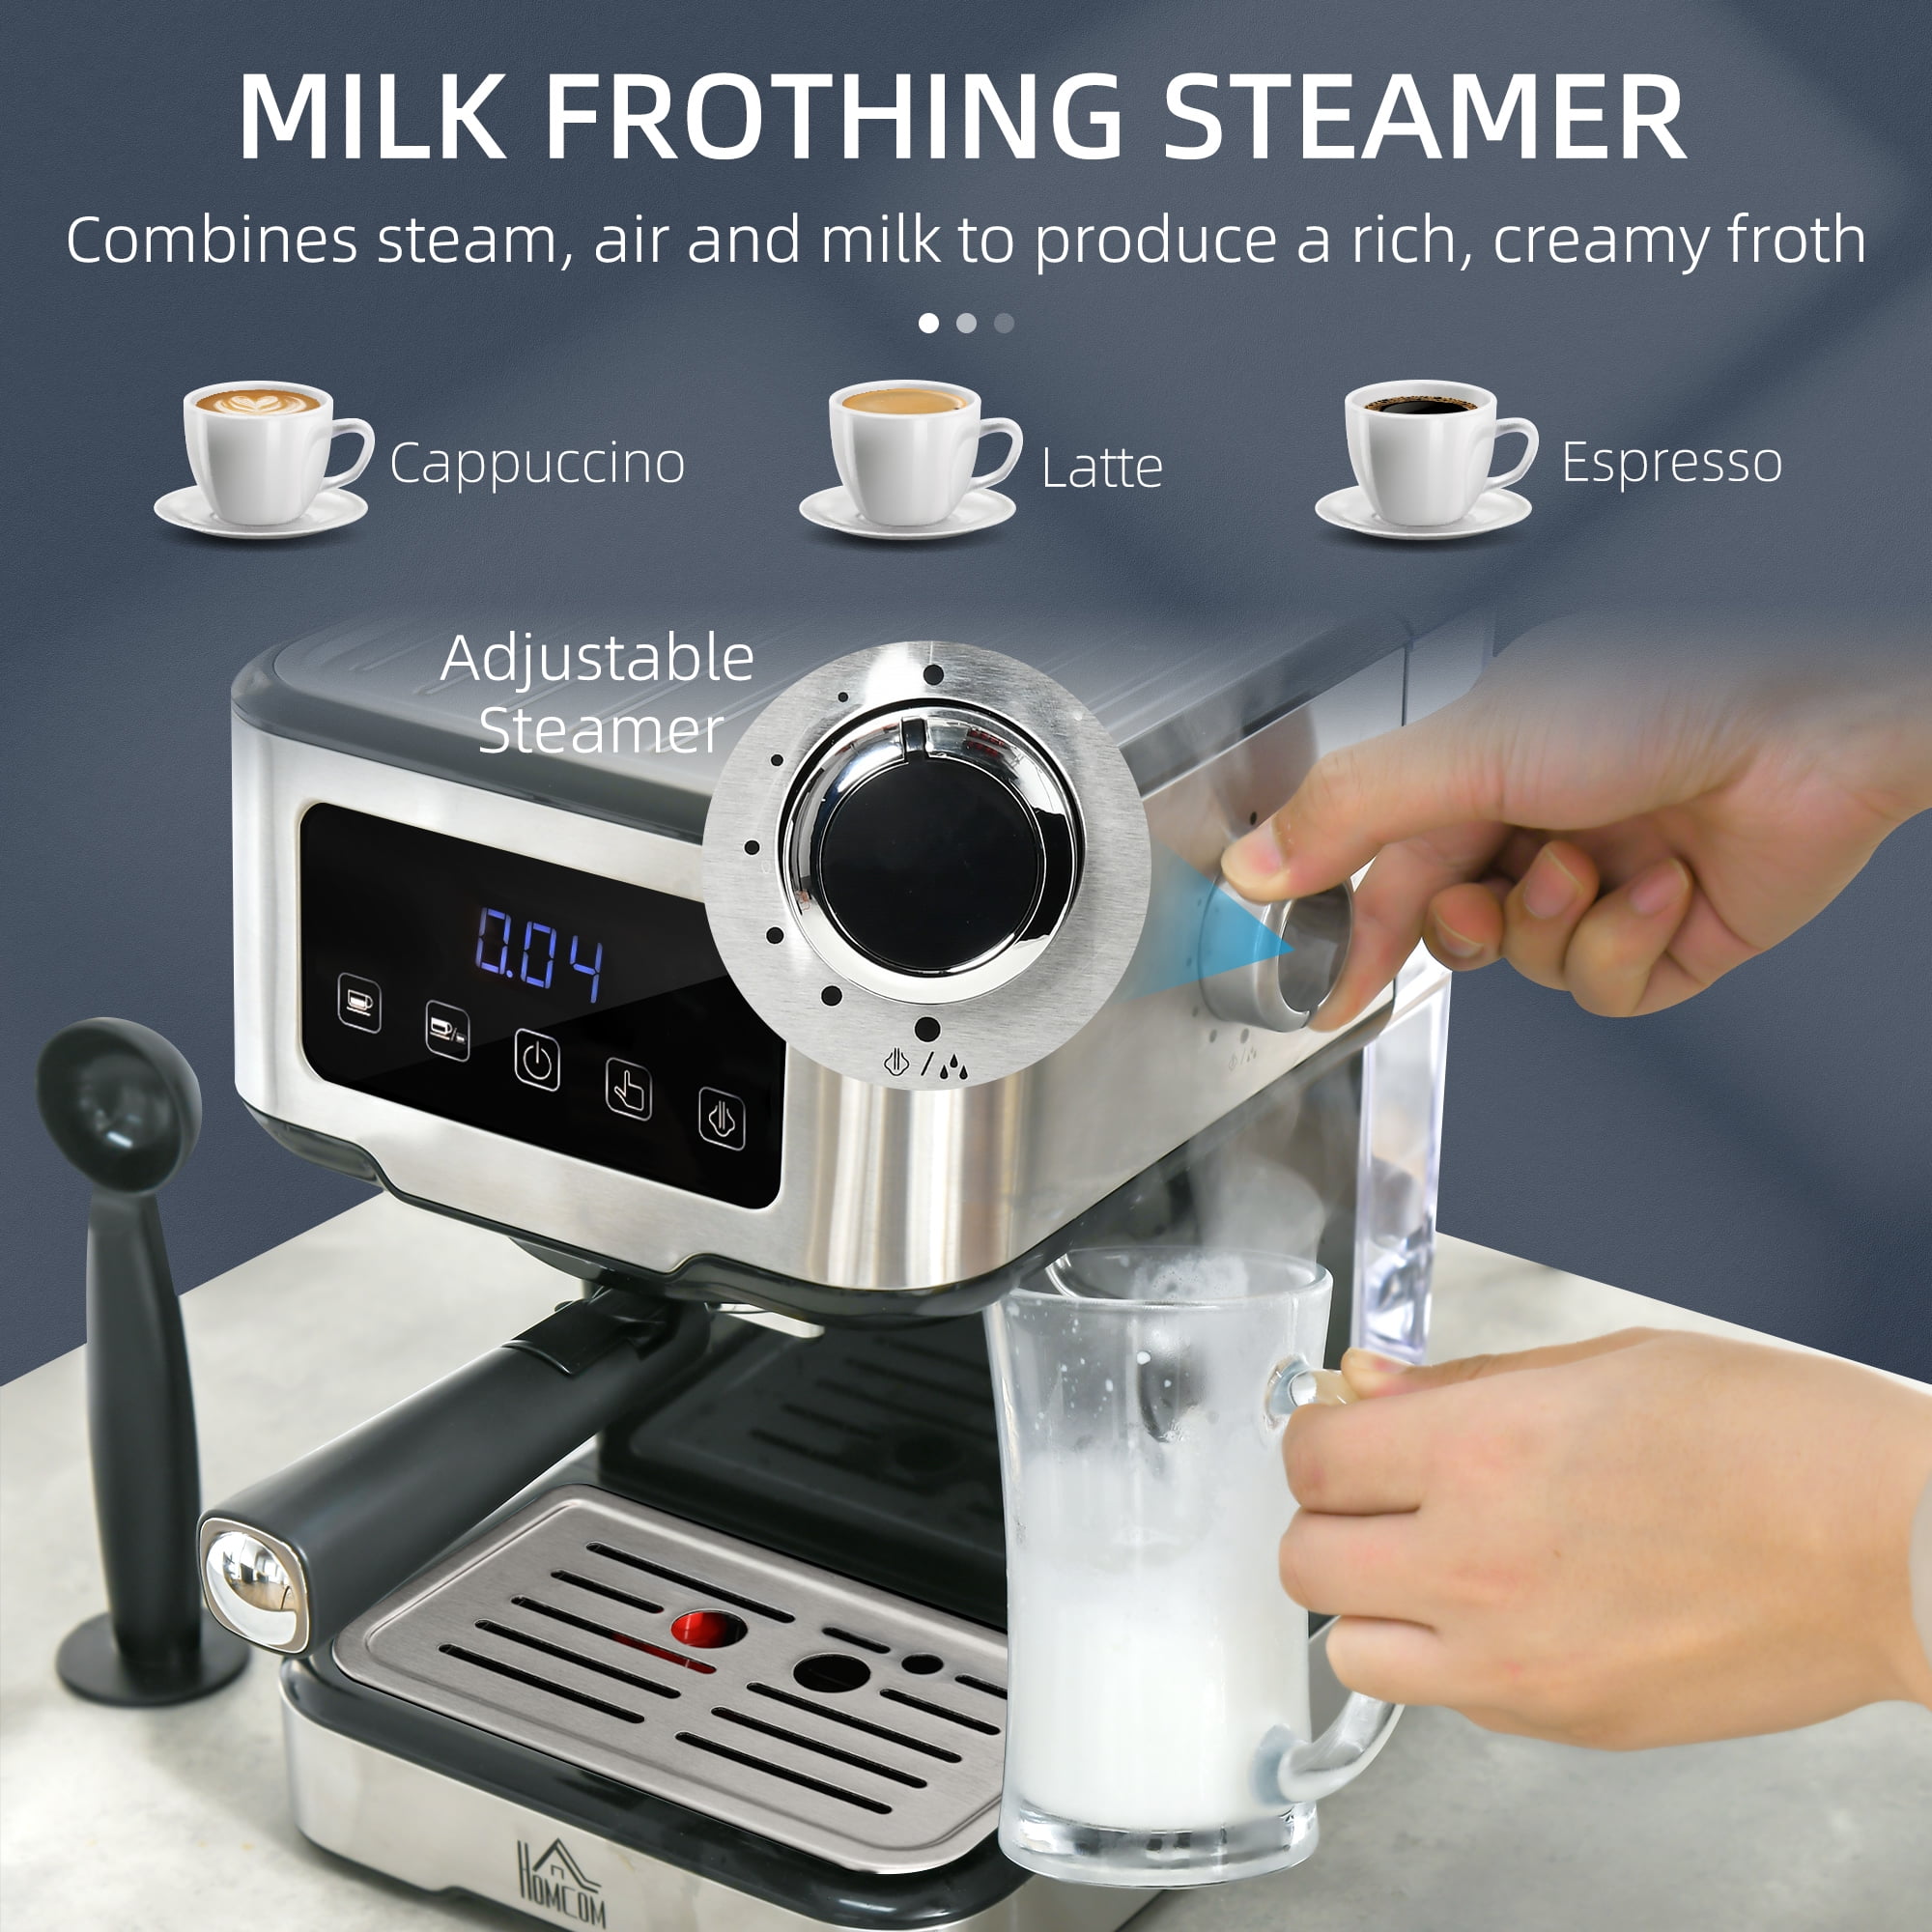 Taylor Classic Cappuccino Frothing Thermometer - Espresso Machine Experts